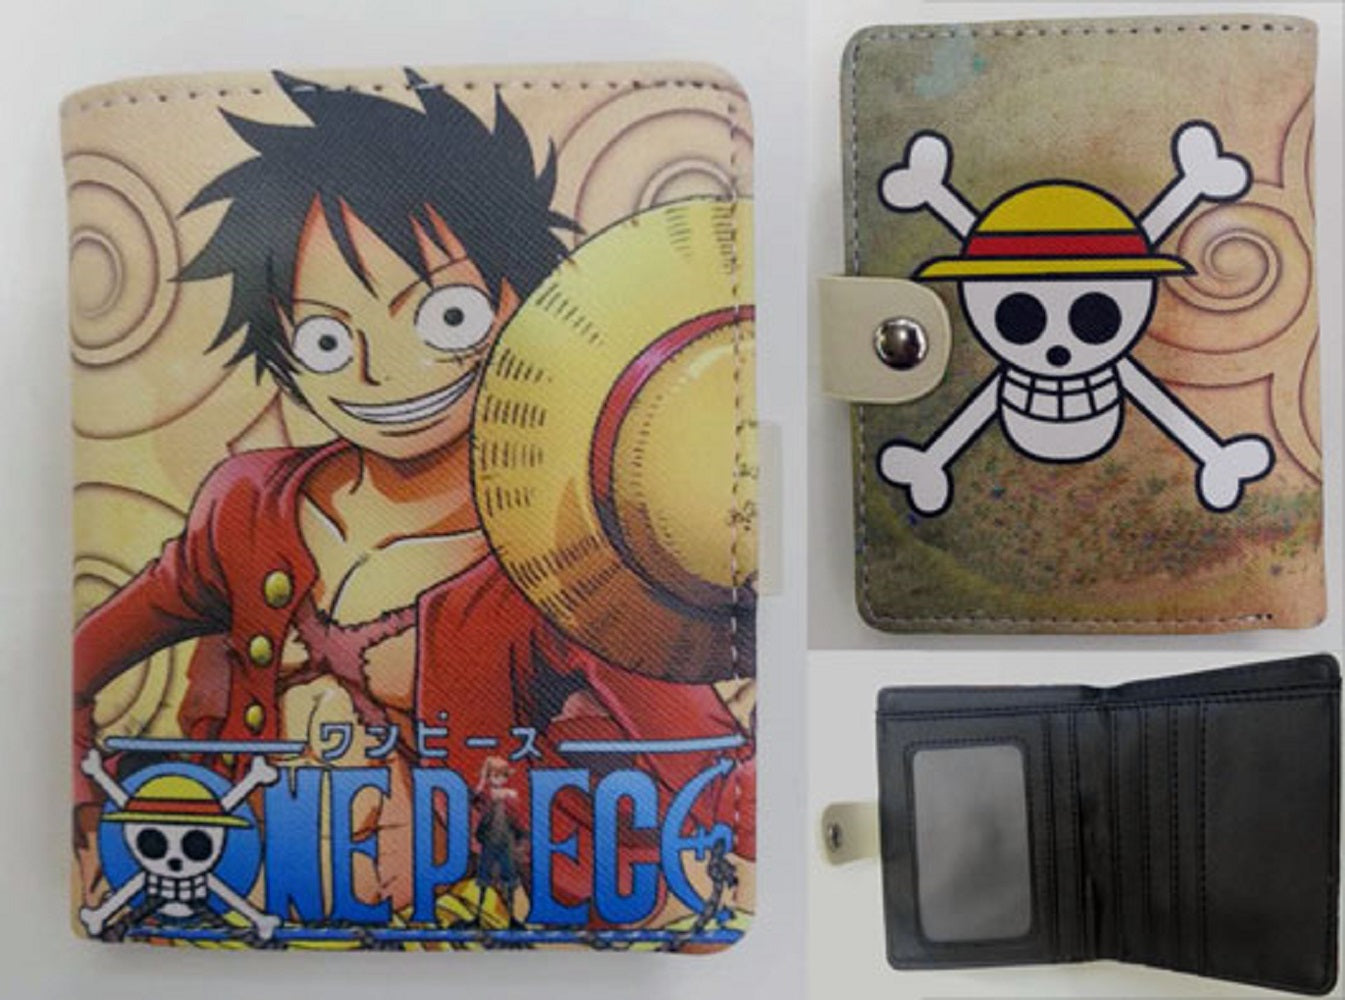 One Piece Luffy Wallet - Super Anime Store FREE SHIPPING FAST SHIPPING USA